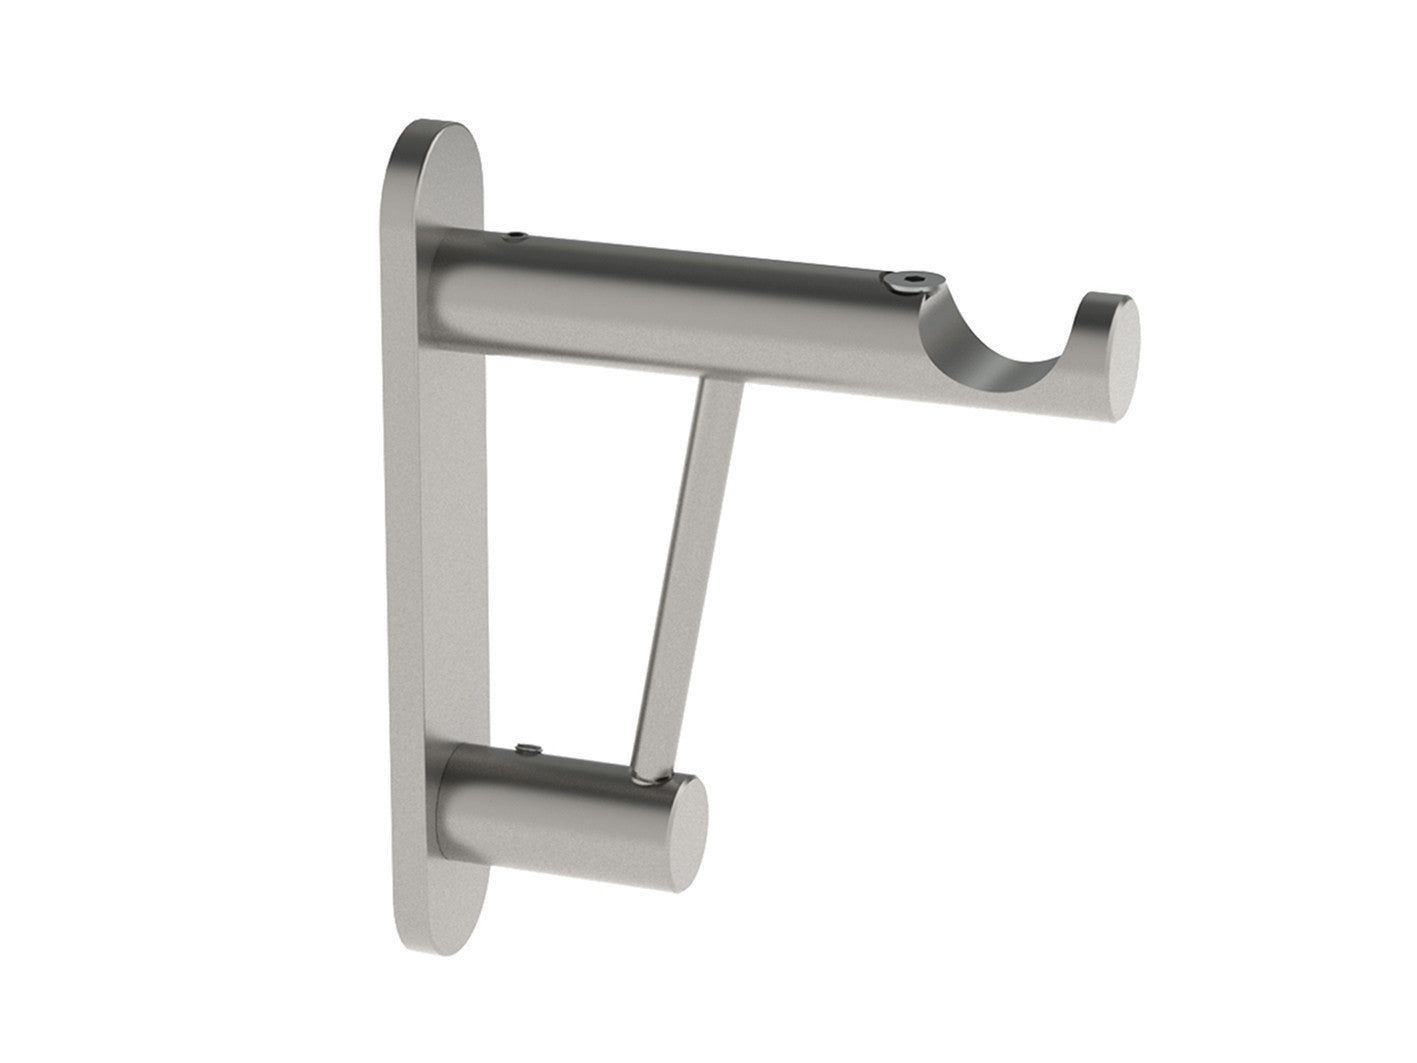 Strong bracket for heavy curtain poles - 19mm curtain poles in stainless steel